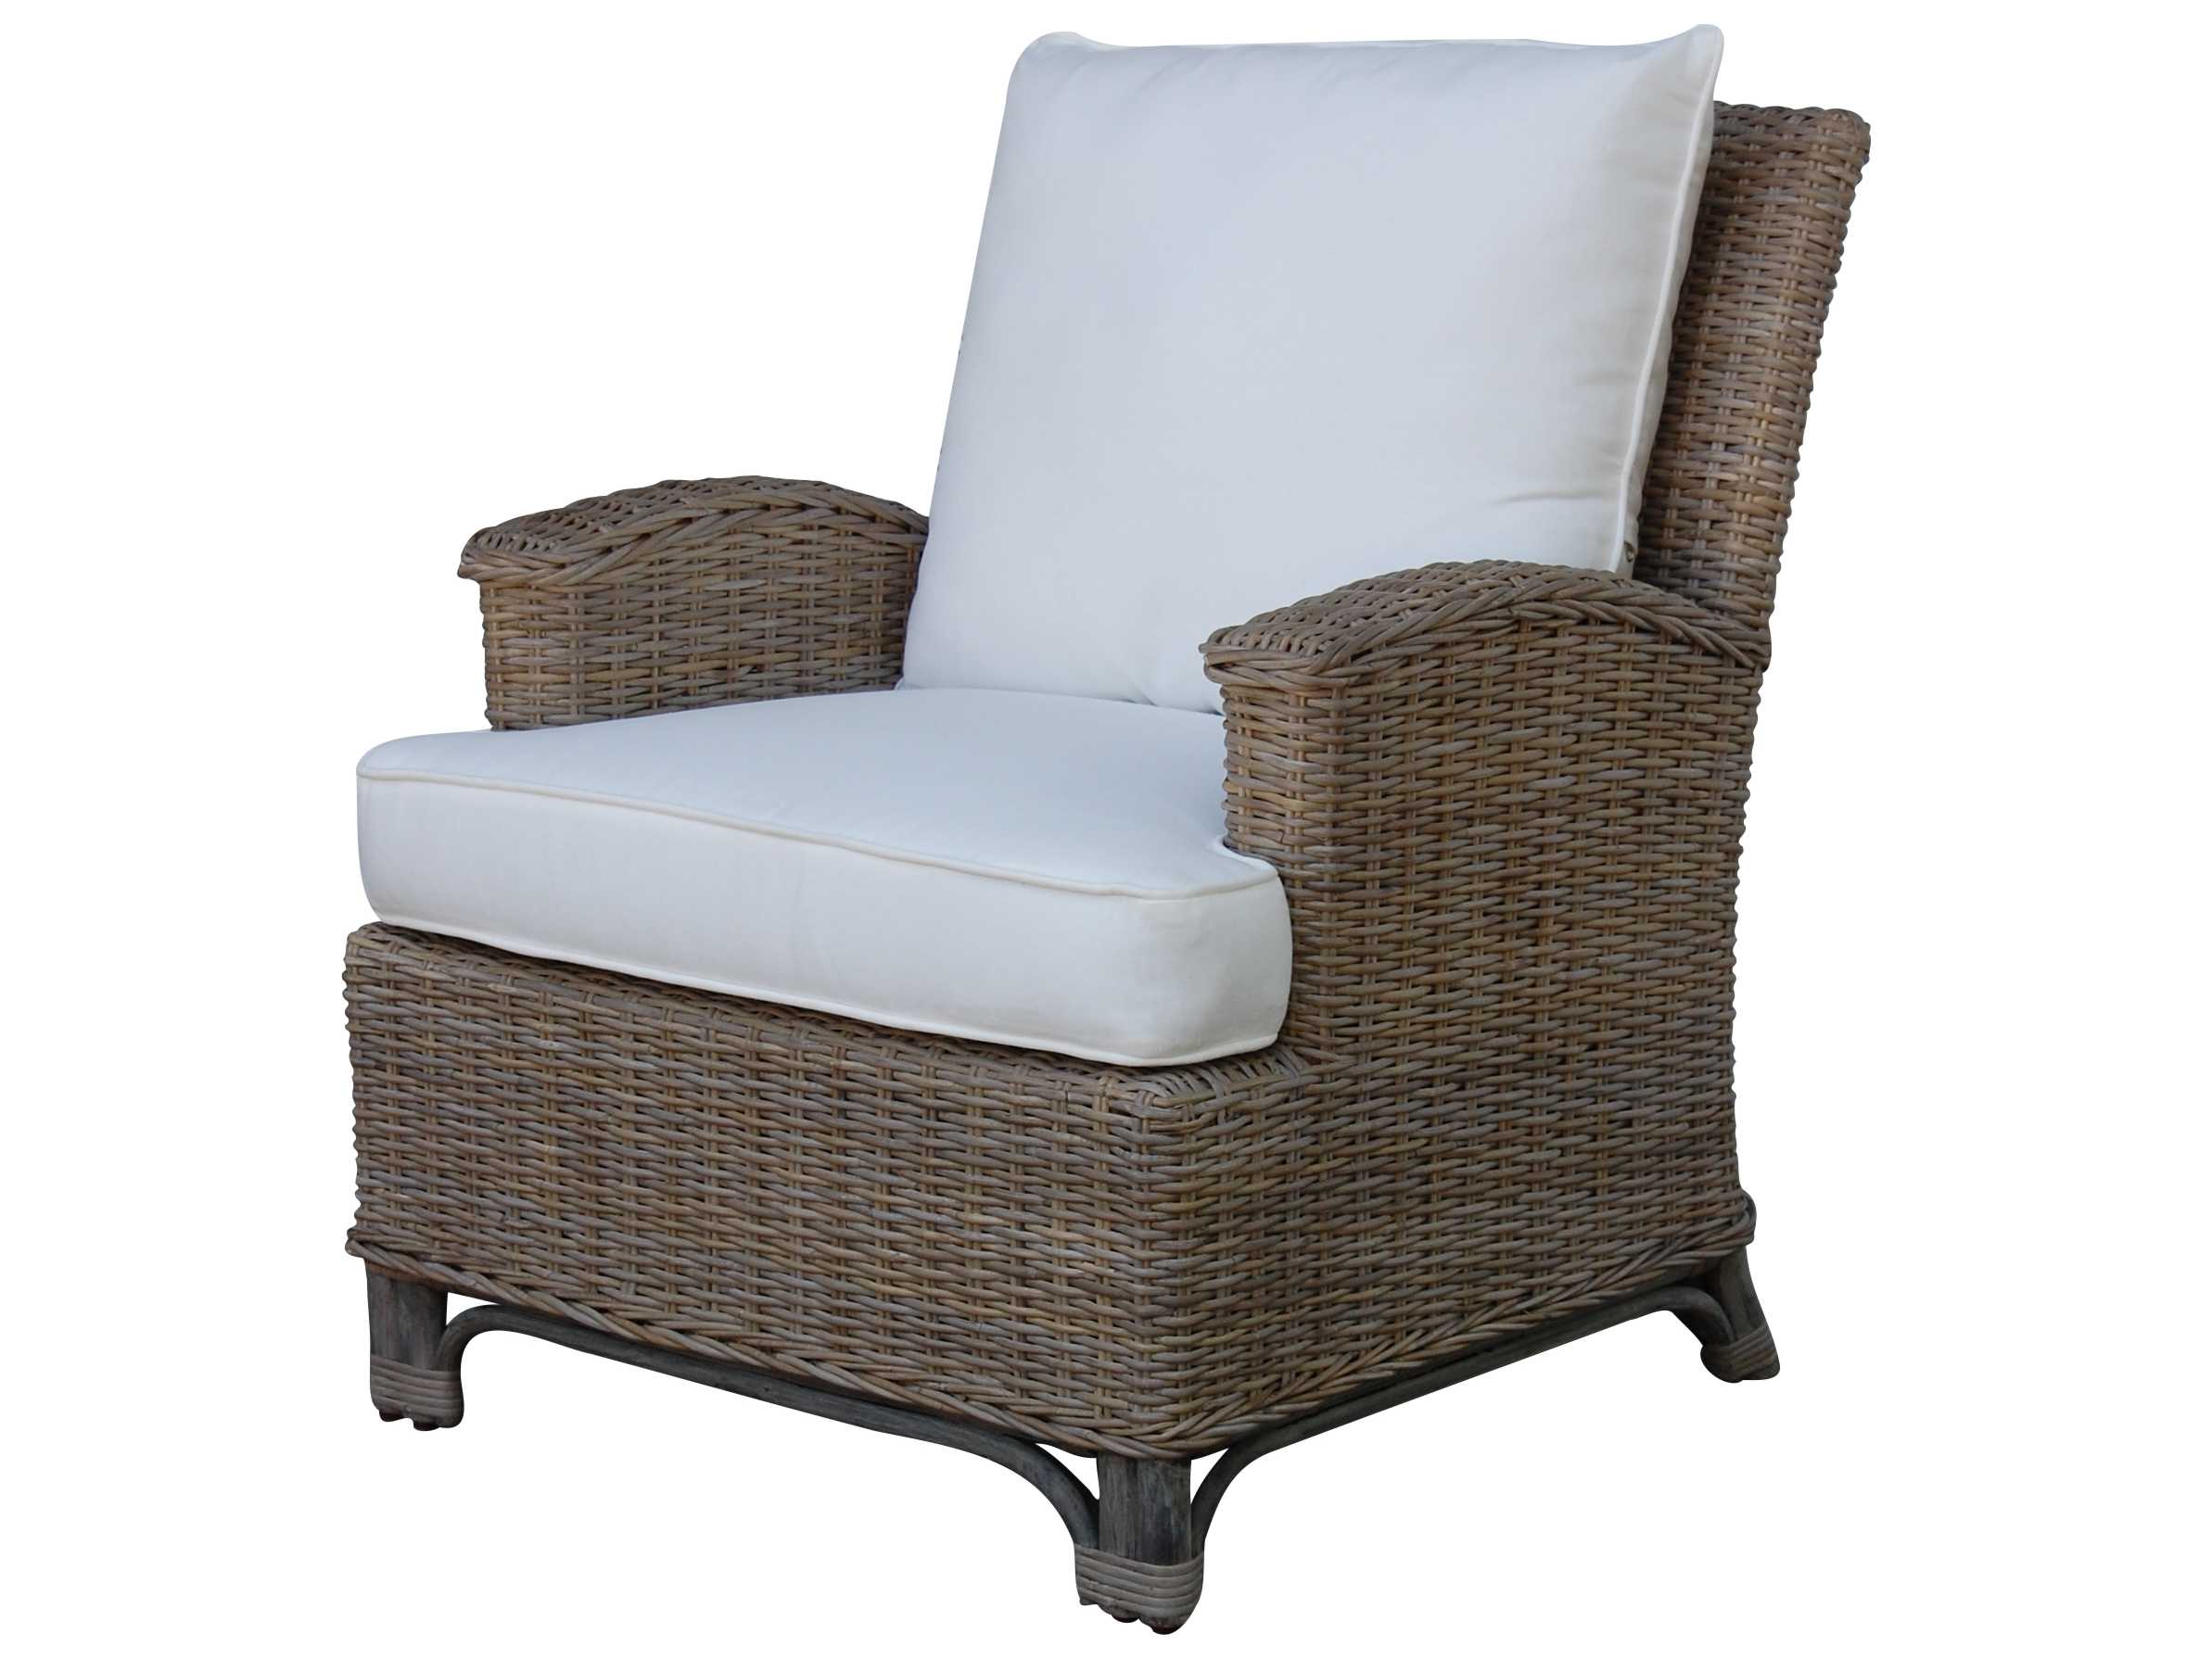 Classic Outdoor Wicker Lounge Chair